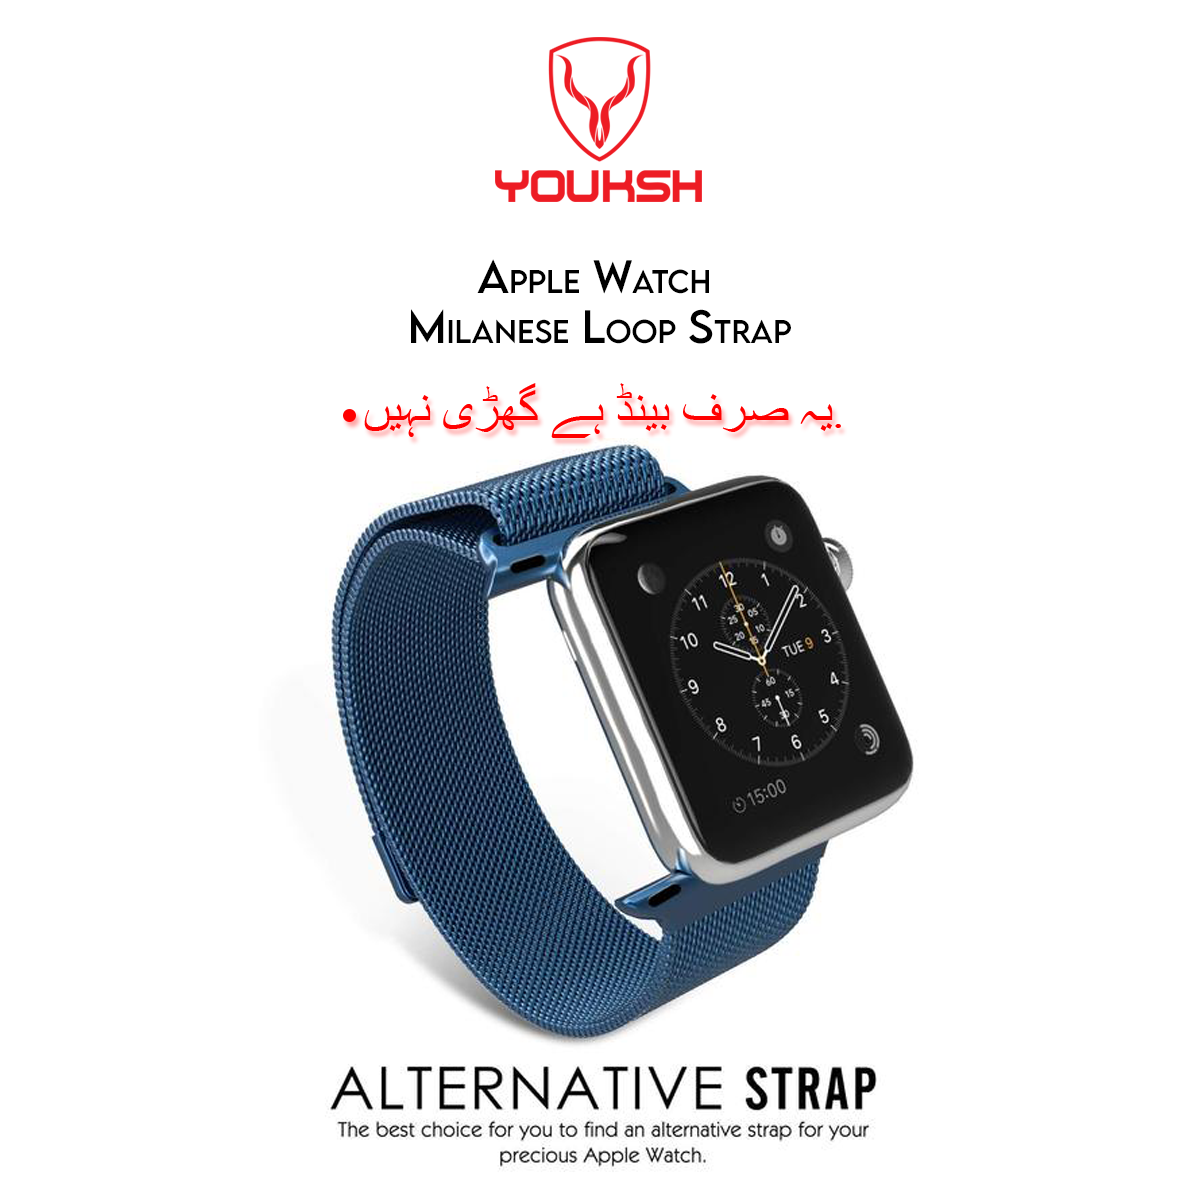 YOUKSH Apple Watch - Milanese Stainless Steel - Strap - 38mm/40mm,For Apple Watch Series 1/2/3/4/5/6.